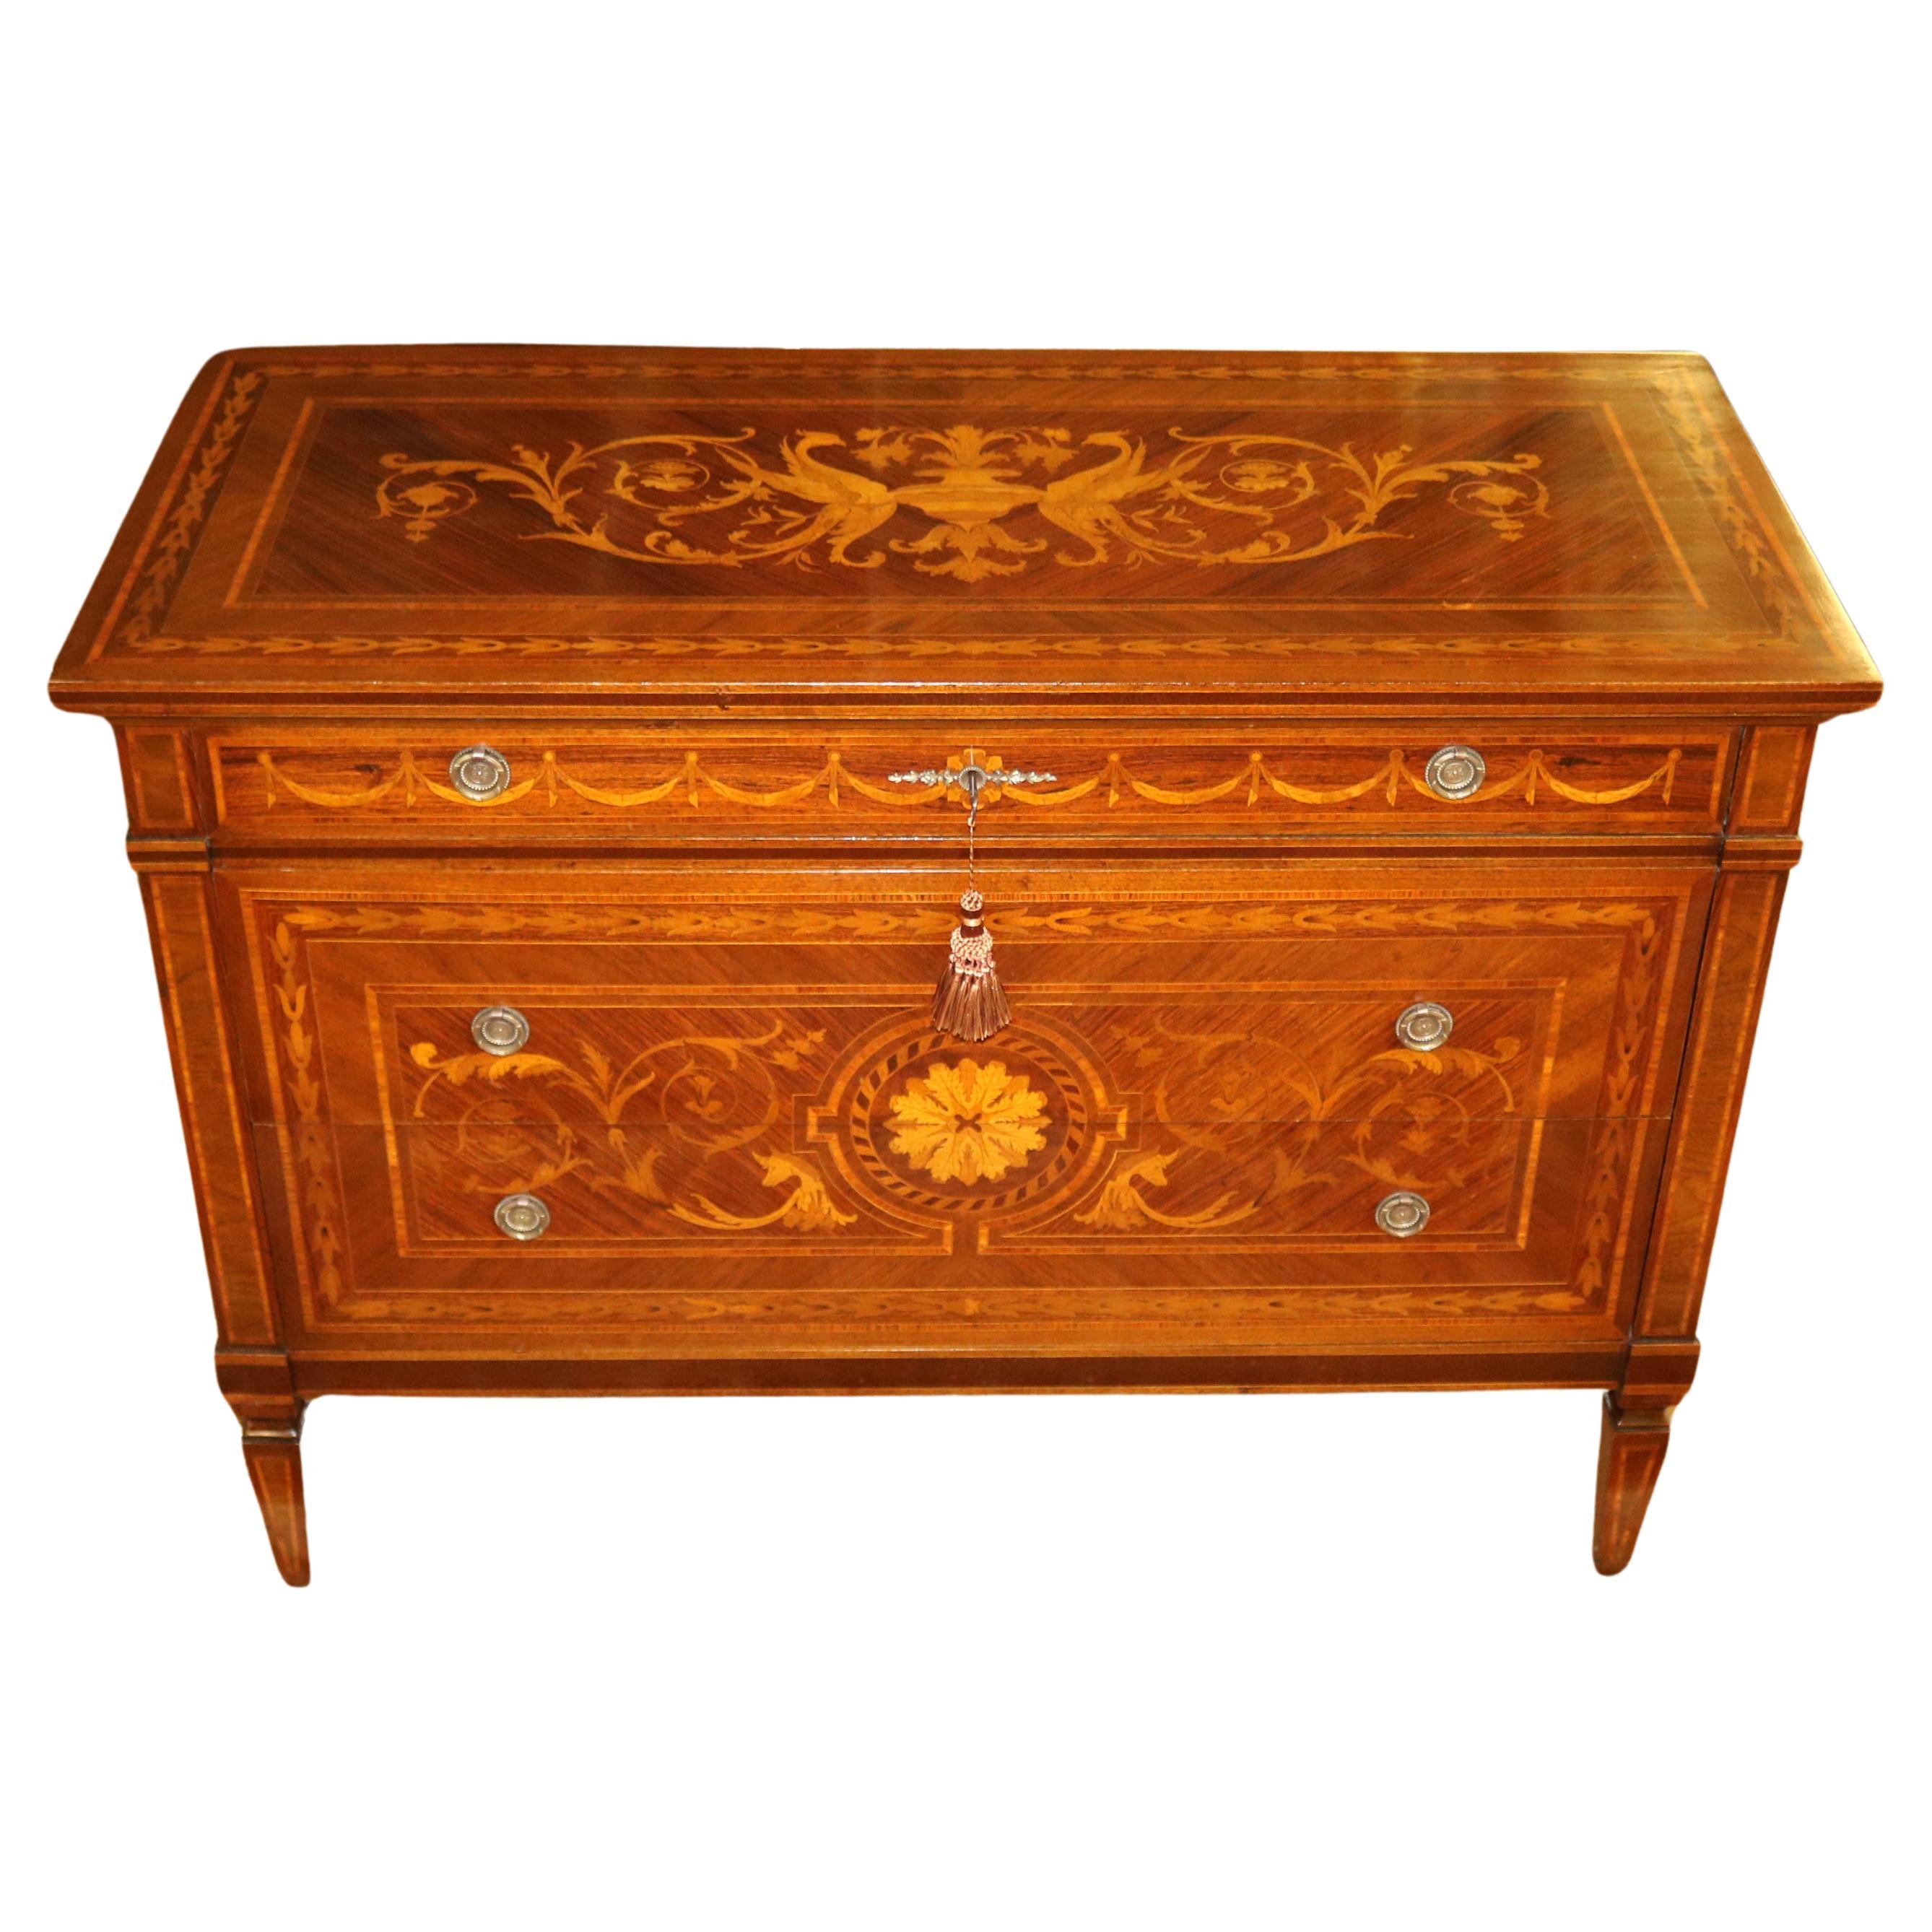 Italian Inlaid Rosewood Commode Dresser Chest of Drawers